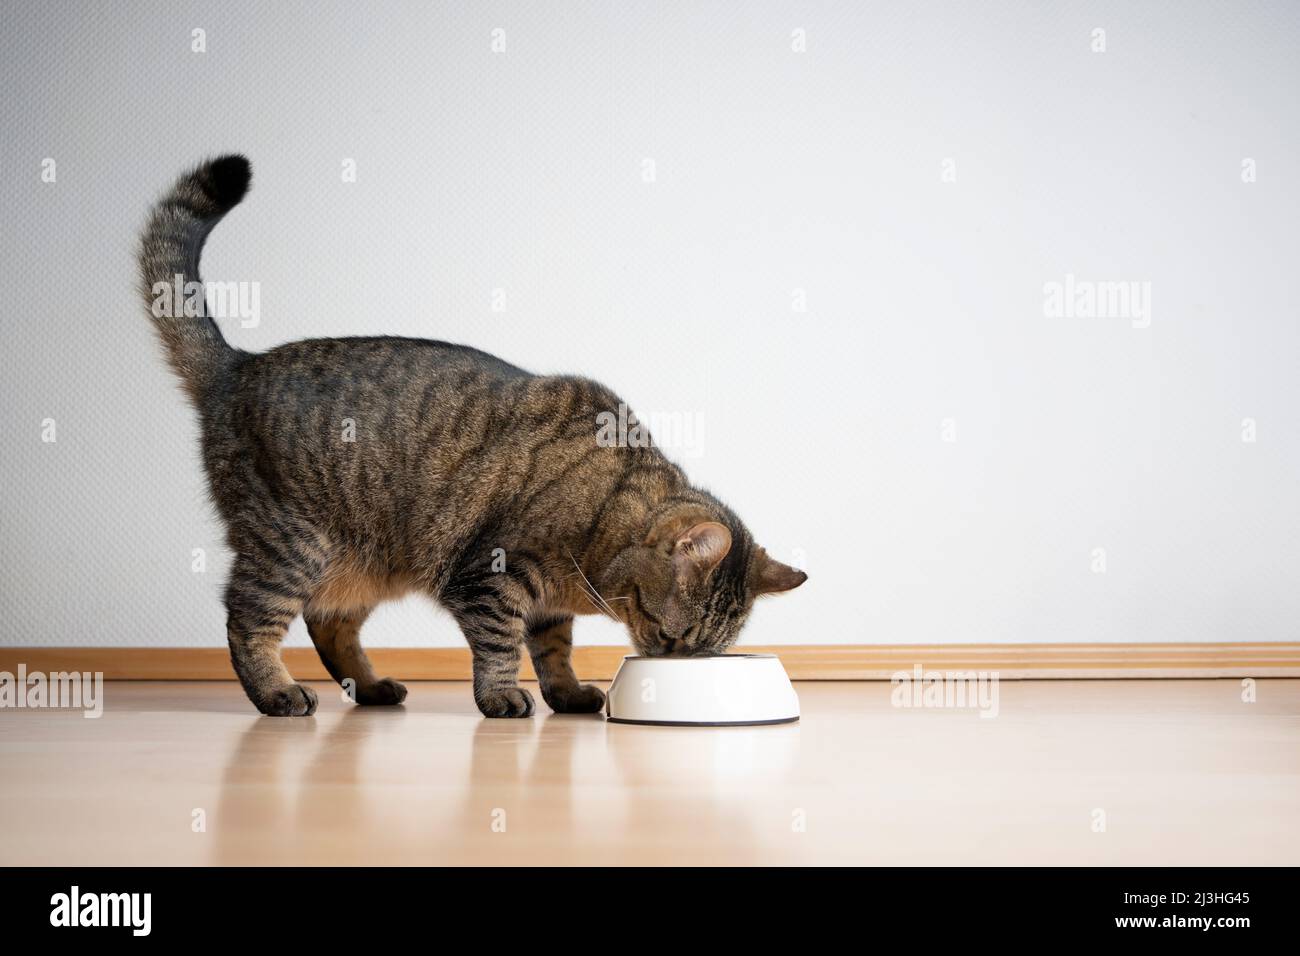 side view of tabby cat eating pet food from feeding bowl on white background with copy space Stock Photo